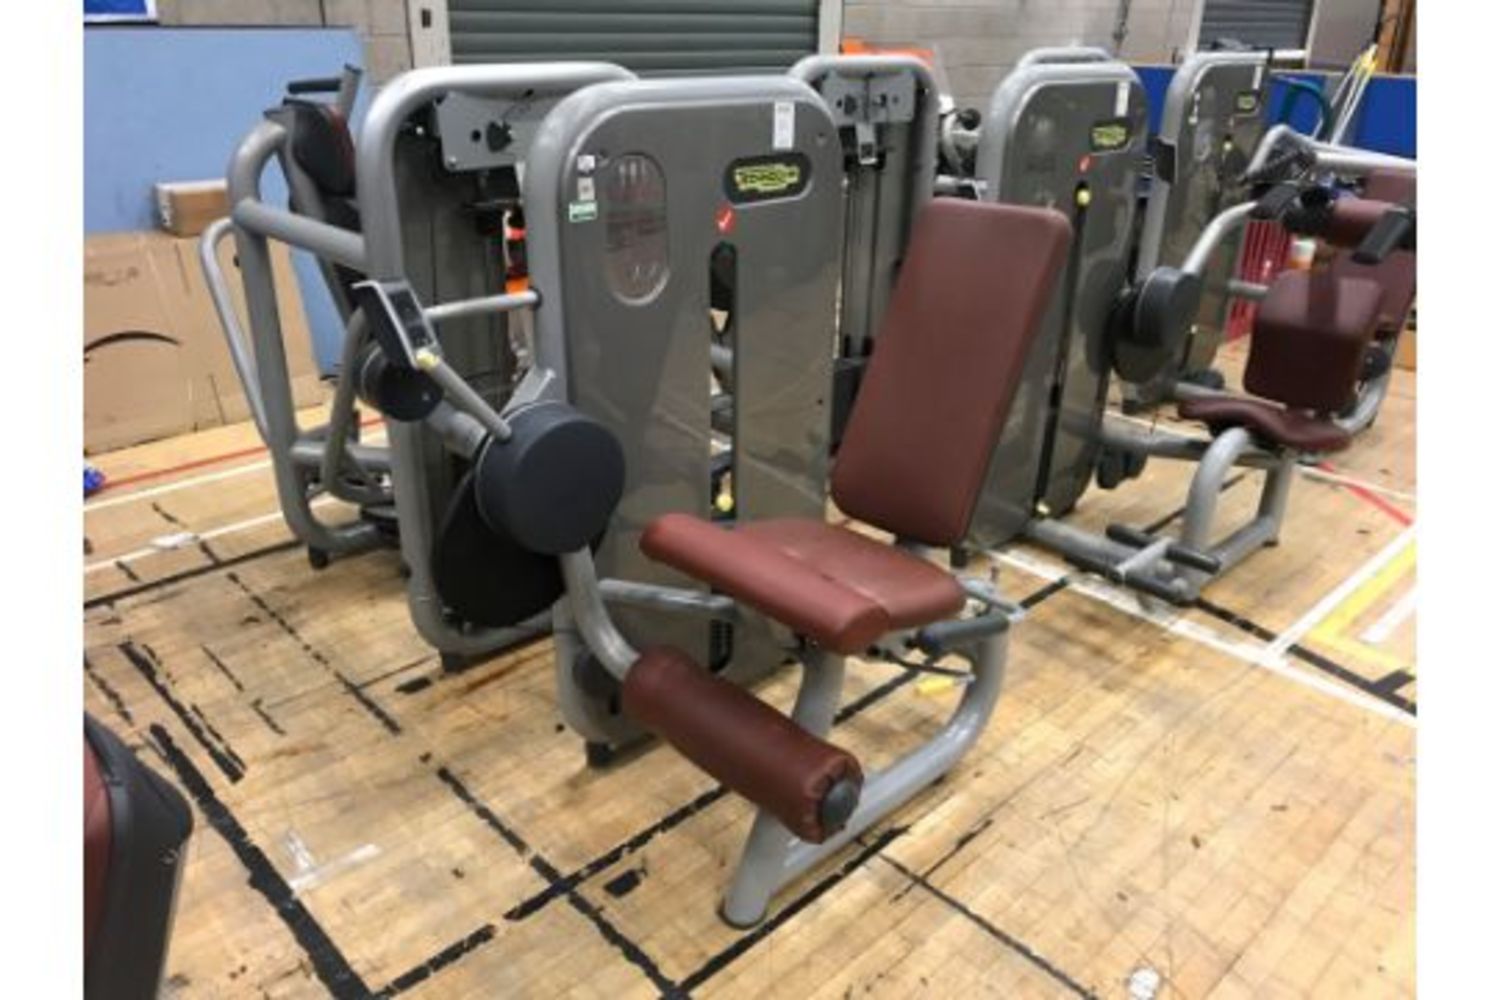 Gym Auction, Everything Must Go, low reserves